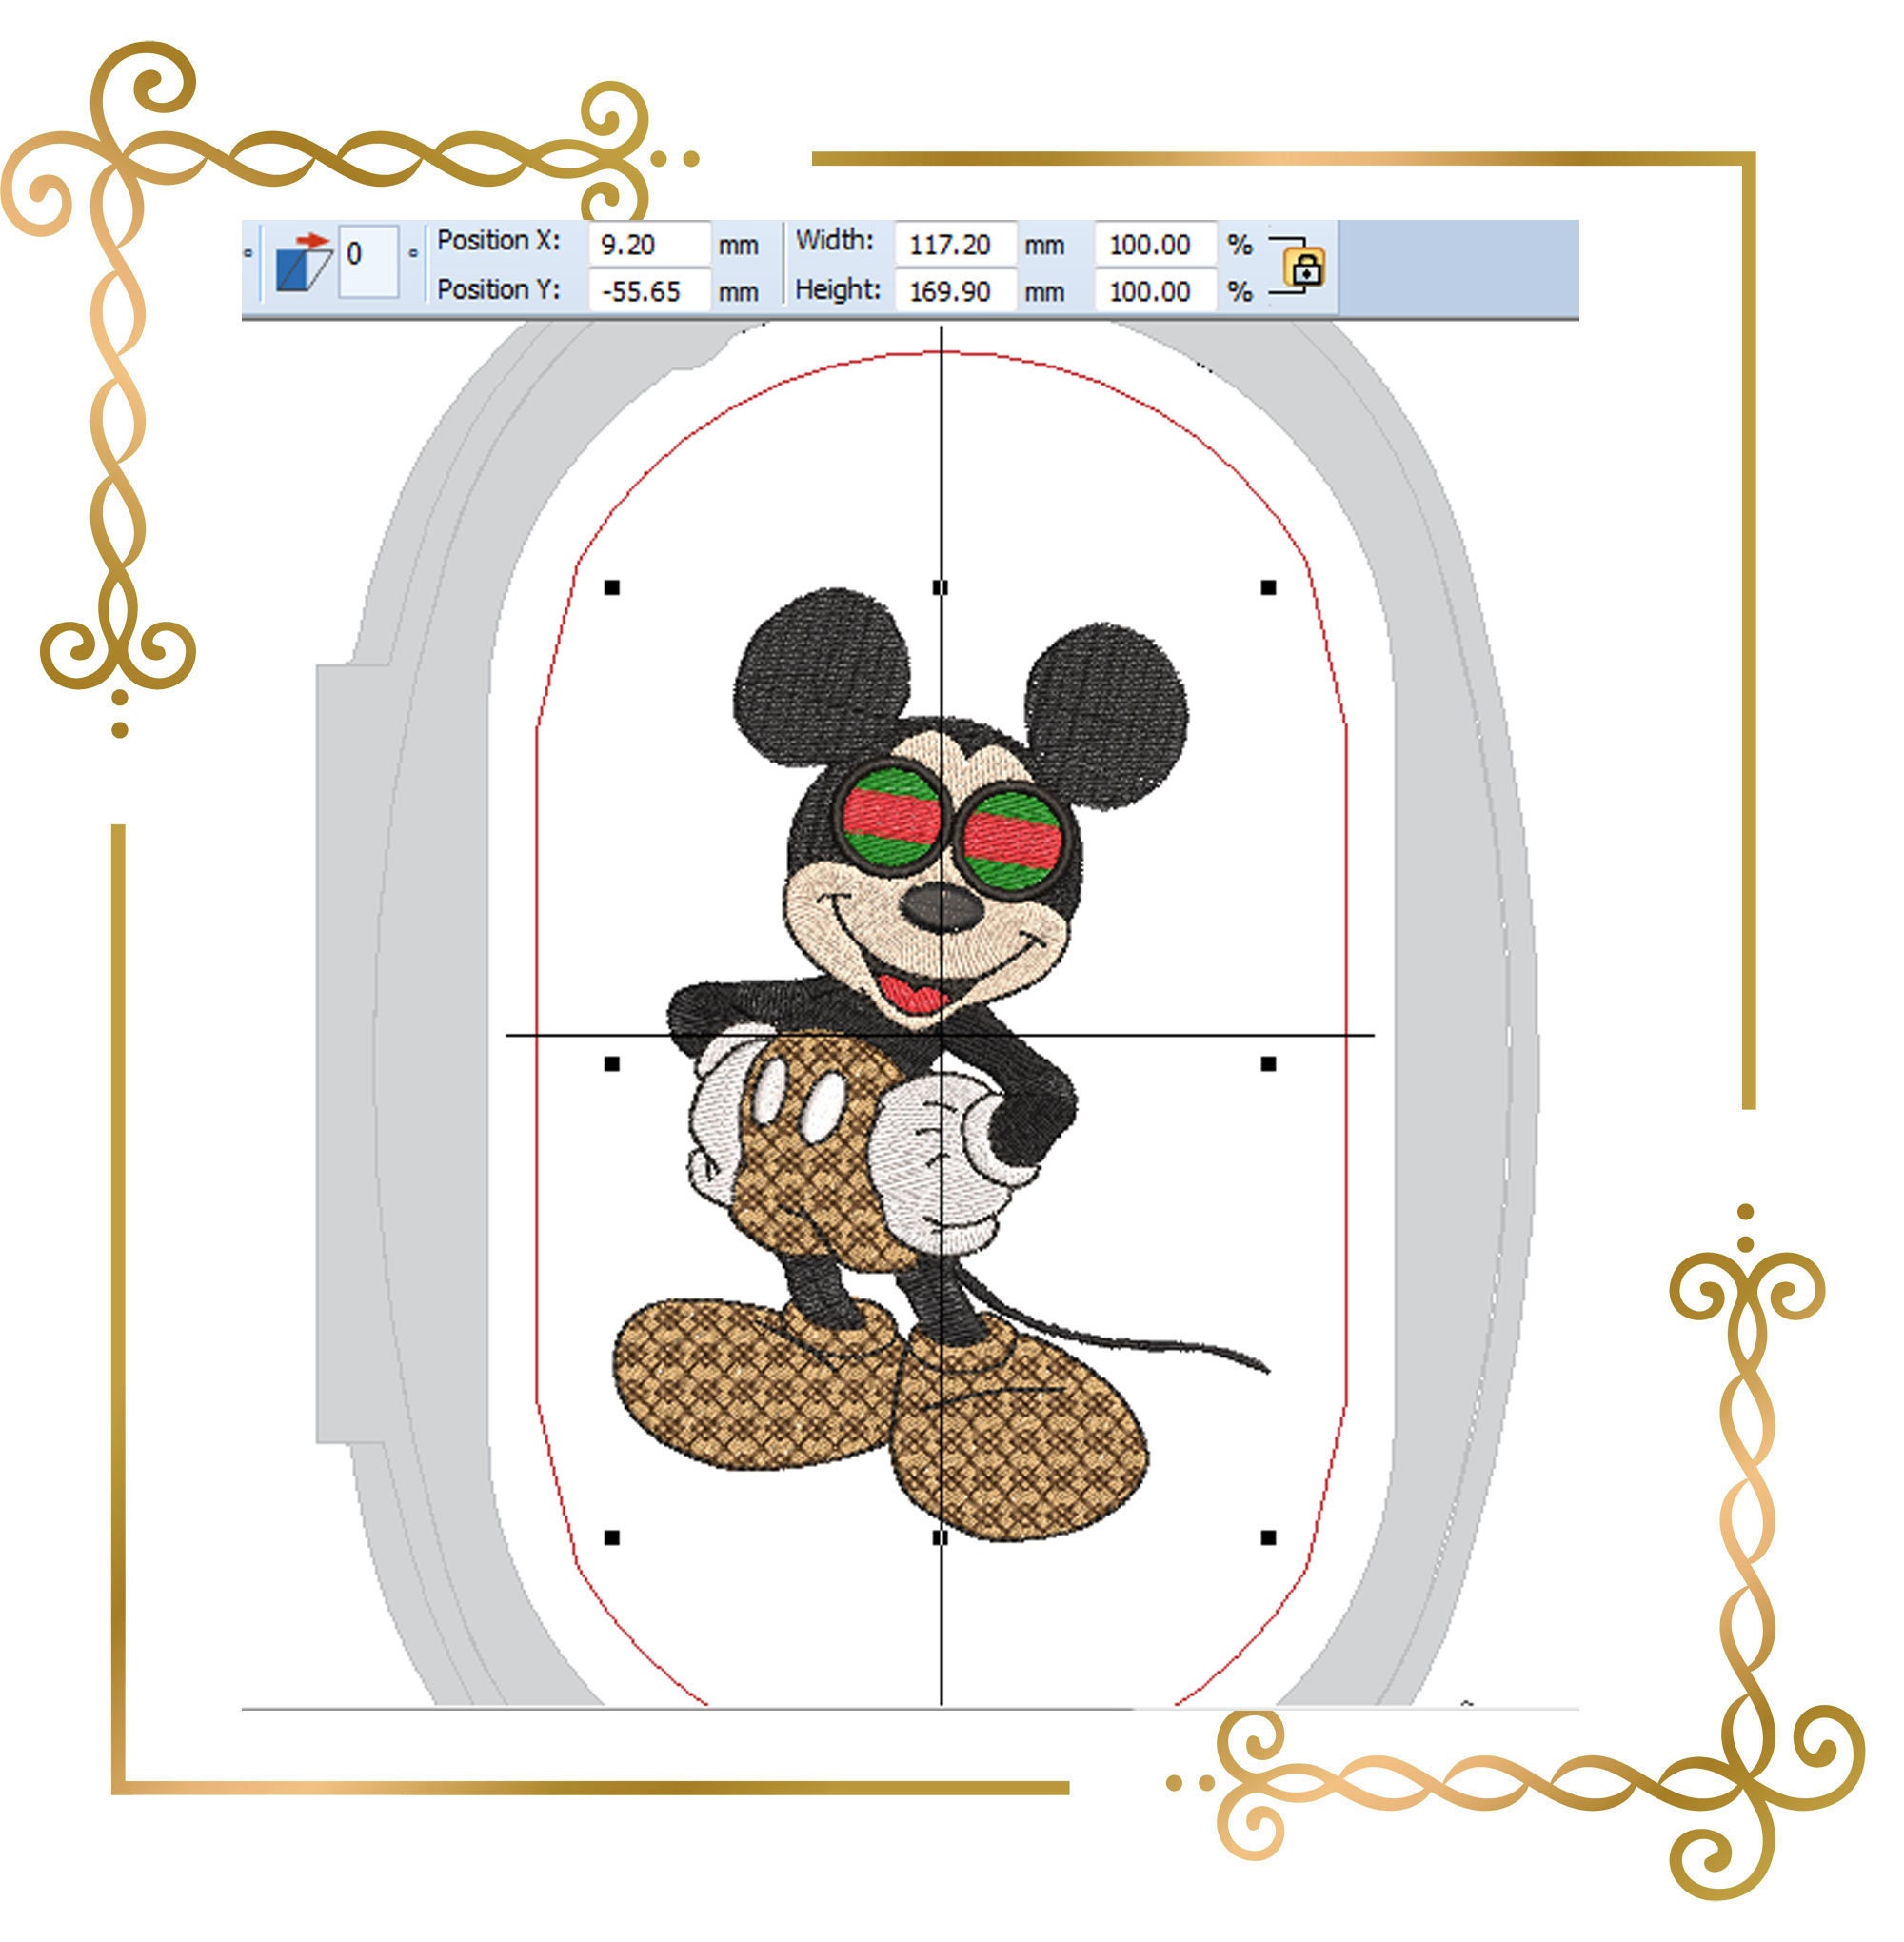 Mouse Fashionista Fantasy Dressed Parody Embroidery Design to 